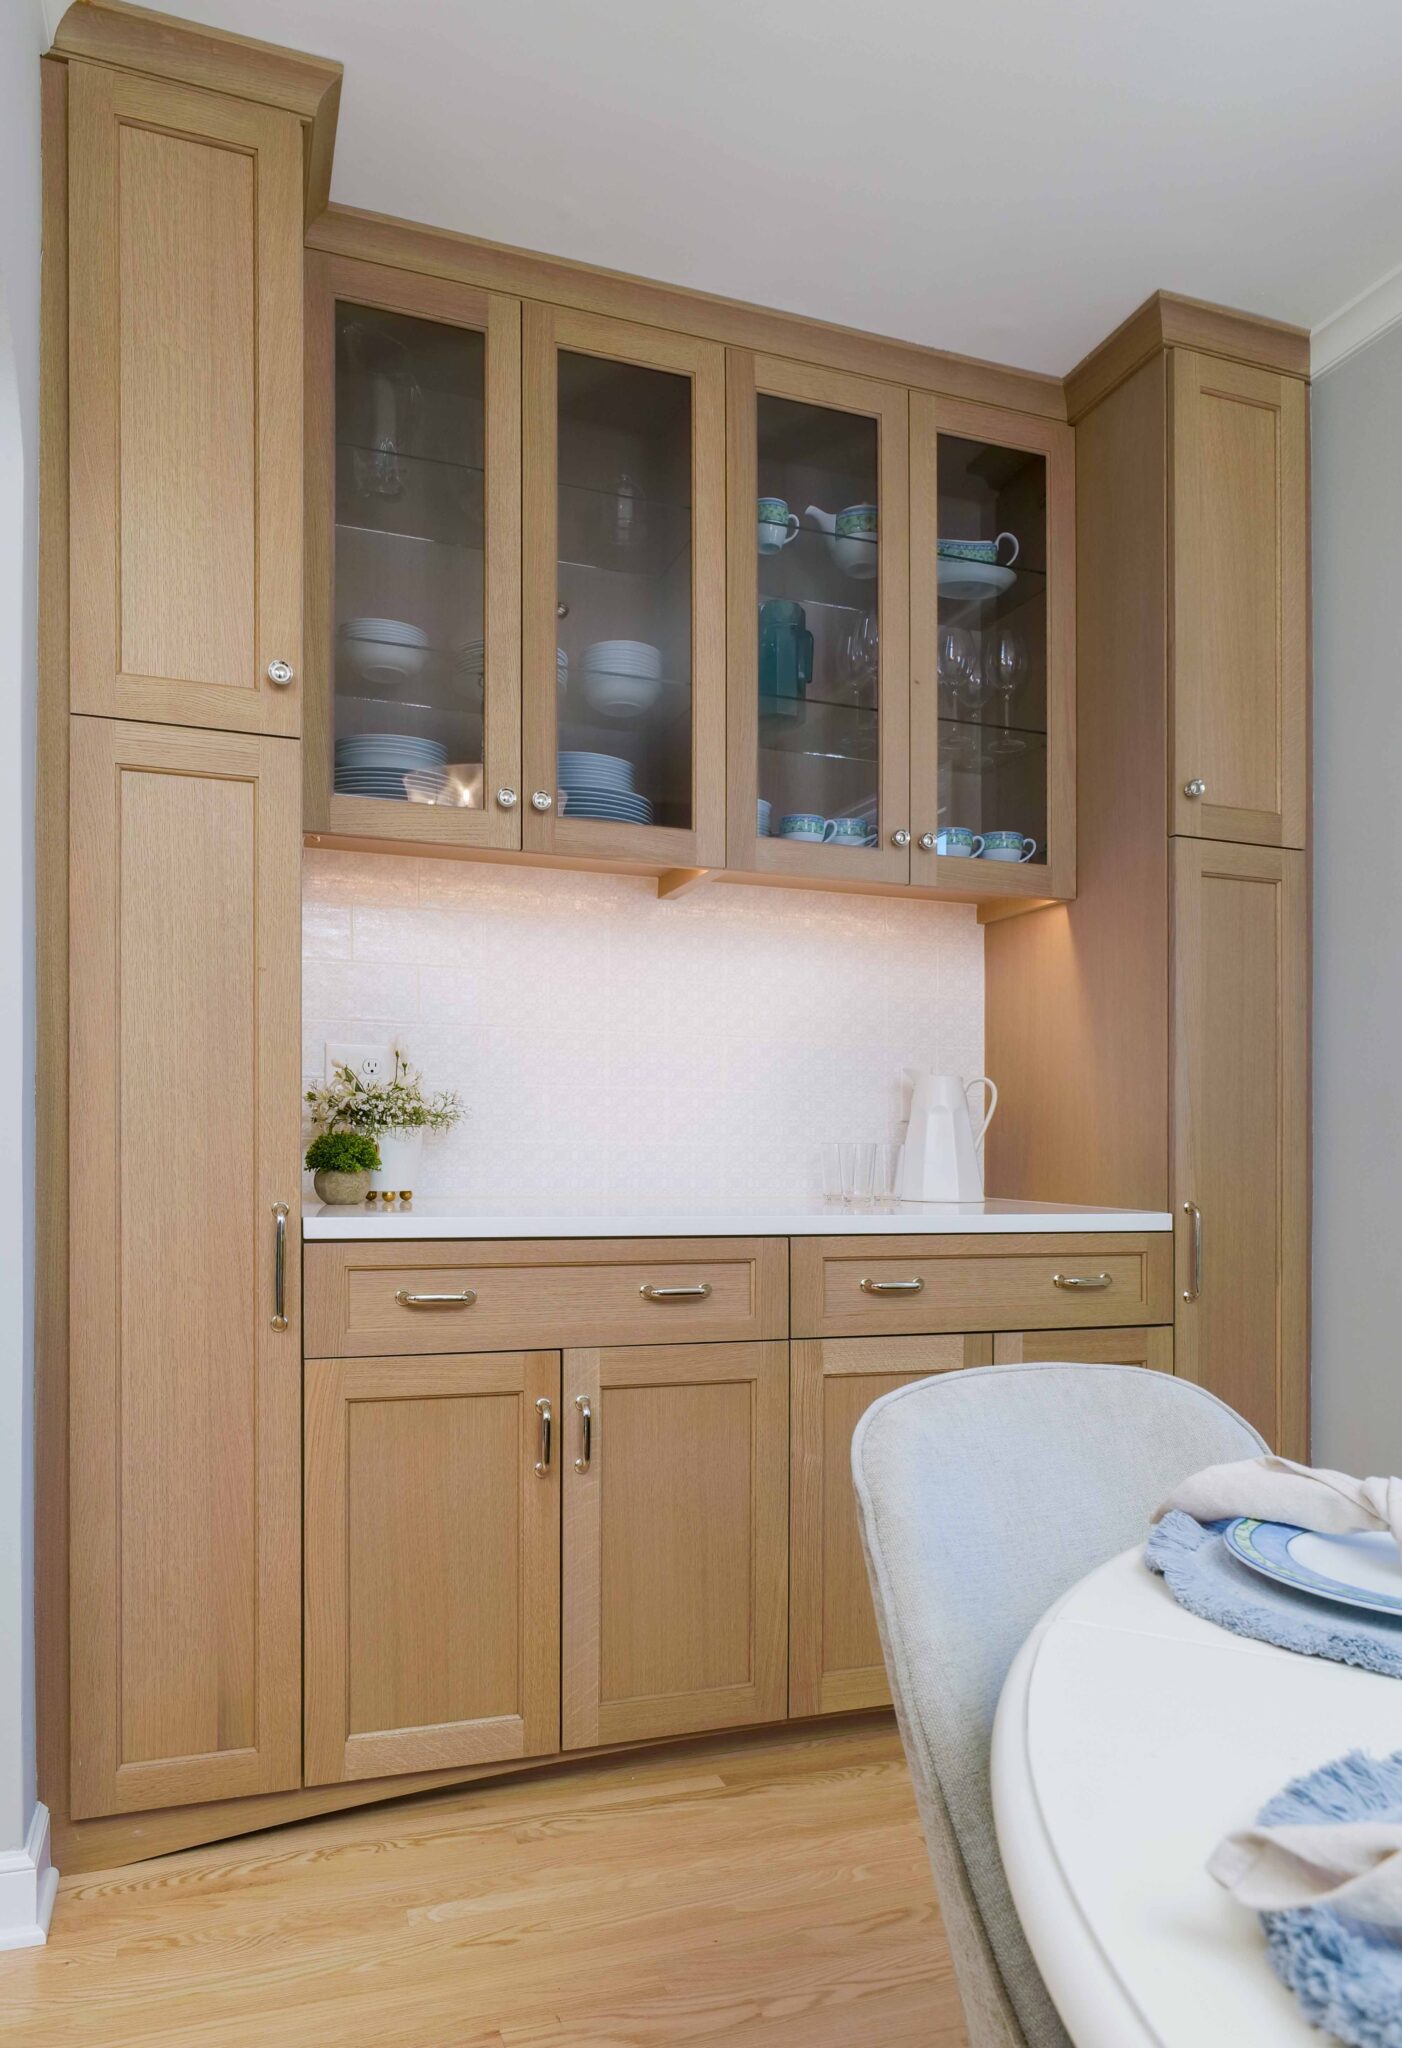 A Hampshire Drive remodel showcases a kitchen cabinet with wooden doors and glass upper panels displaying dishes. Below, the cabinet features a white countertop, drawers, and cabinets with silver handles. A small plant and white jug adorn the counter.